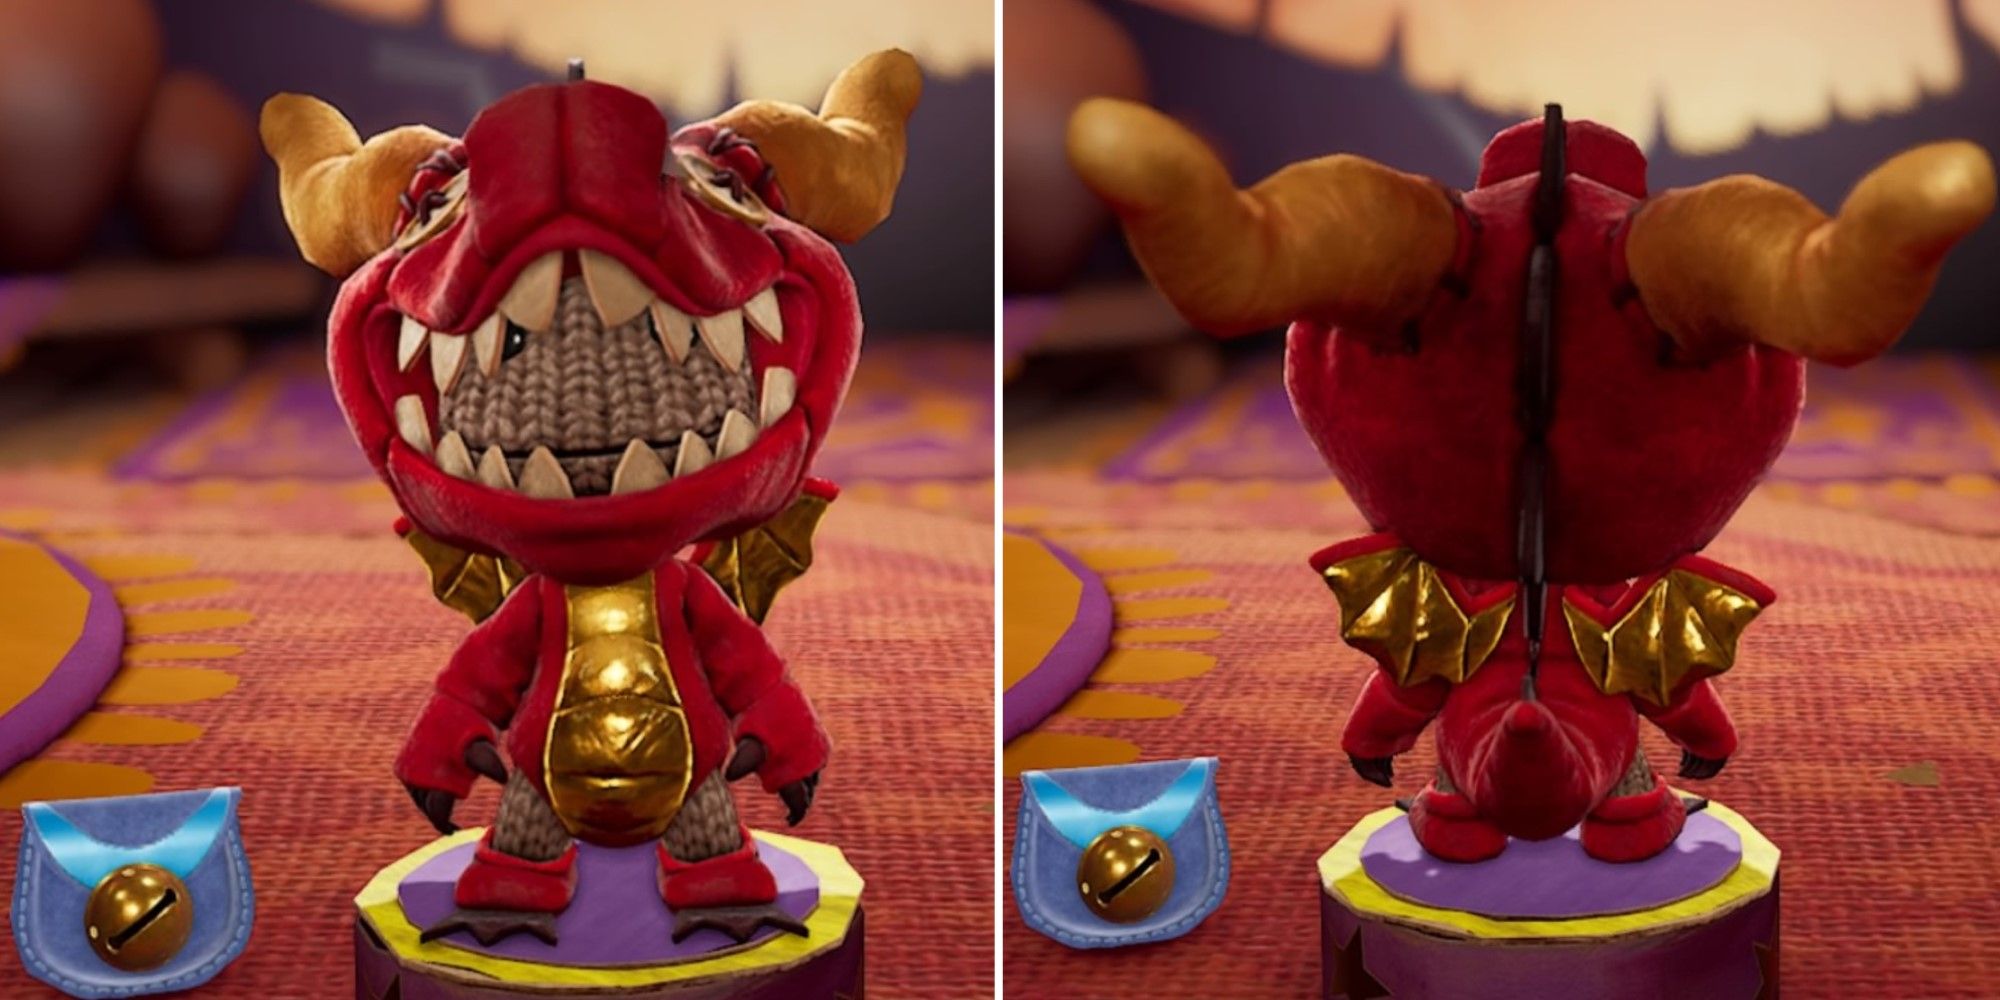 Two screenshots of the Dragon Costume from Sackboy: A Big Adventure.